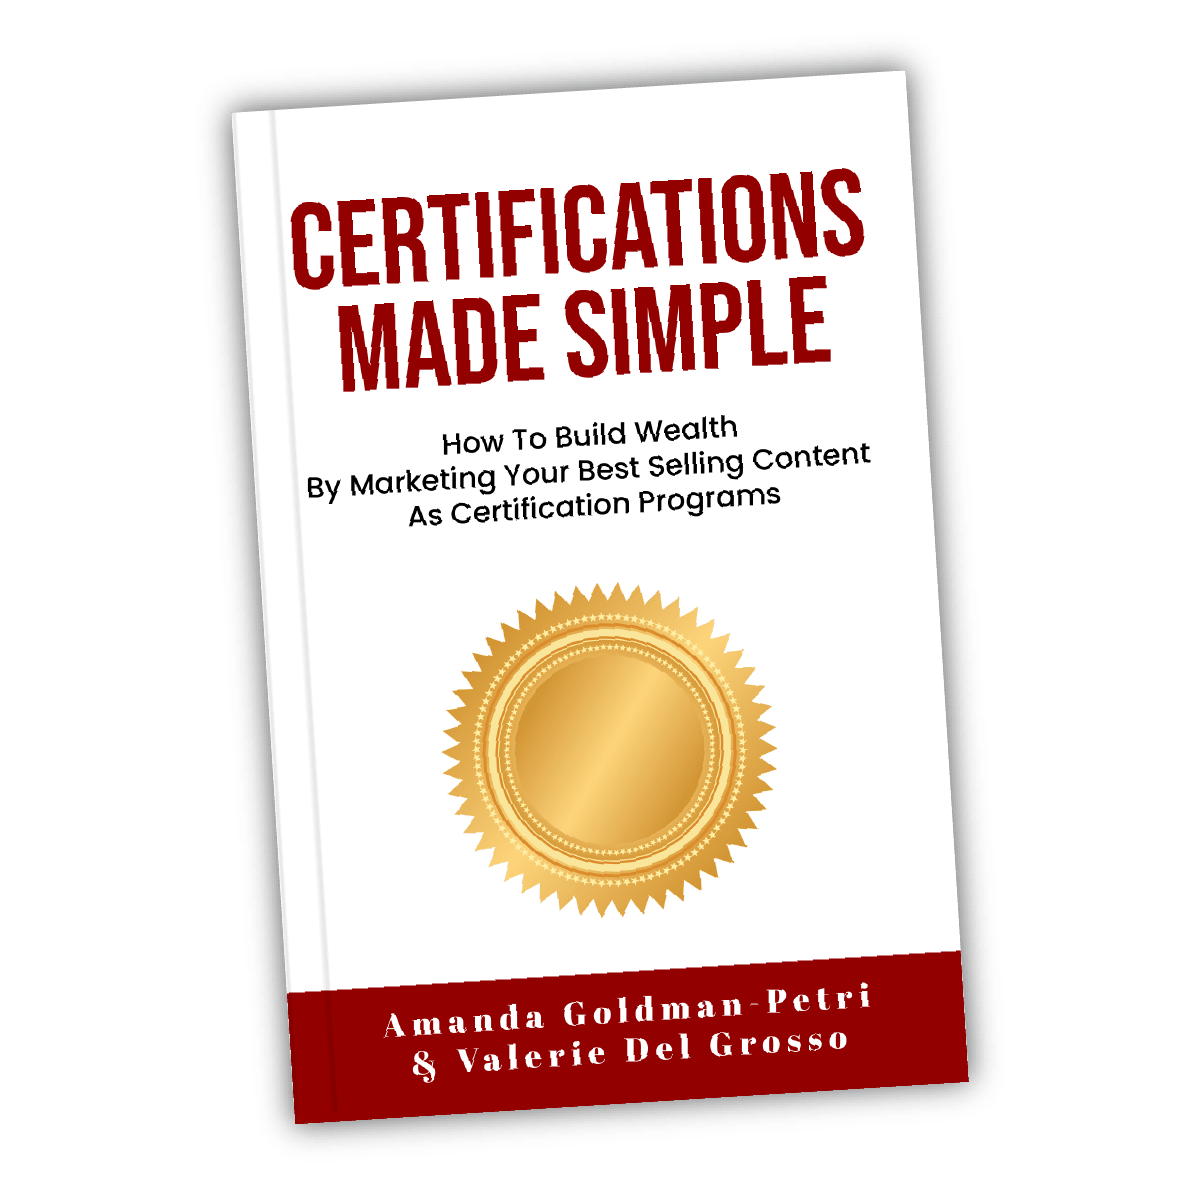 CERTIFICATIONS MADE SIMPLE THE BOOK